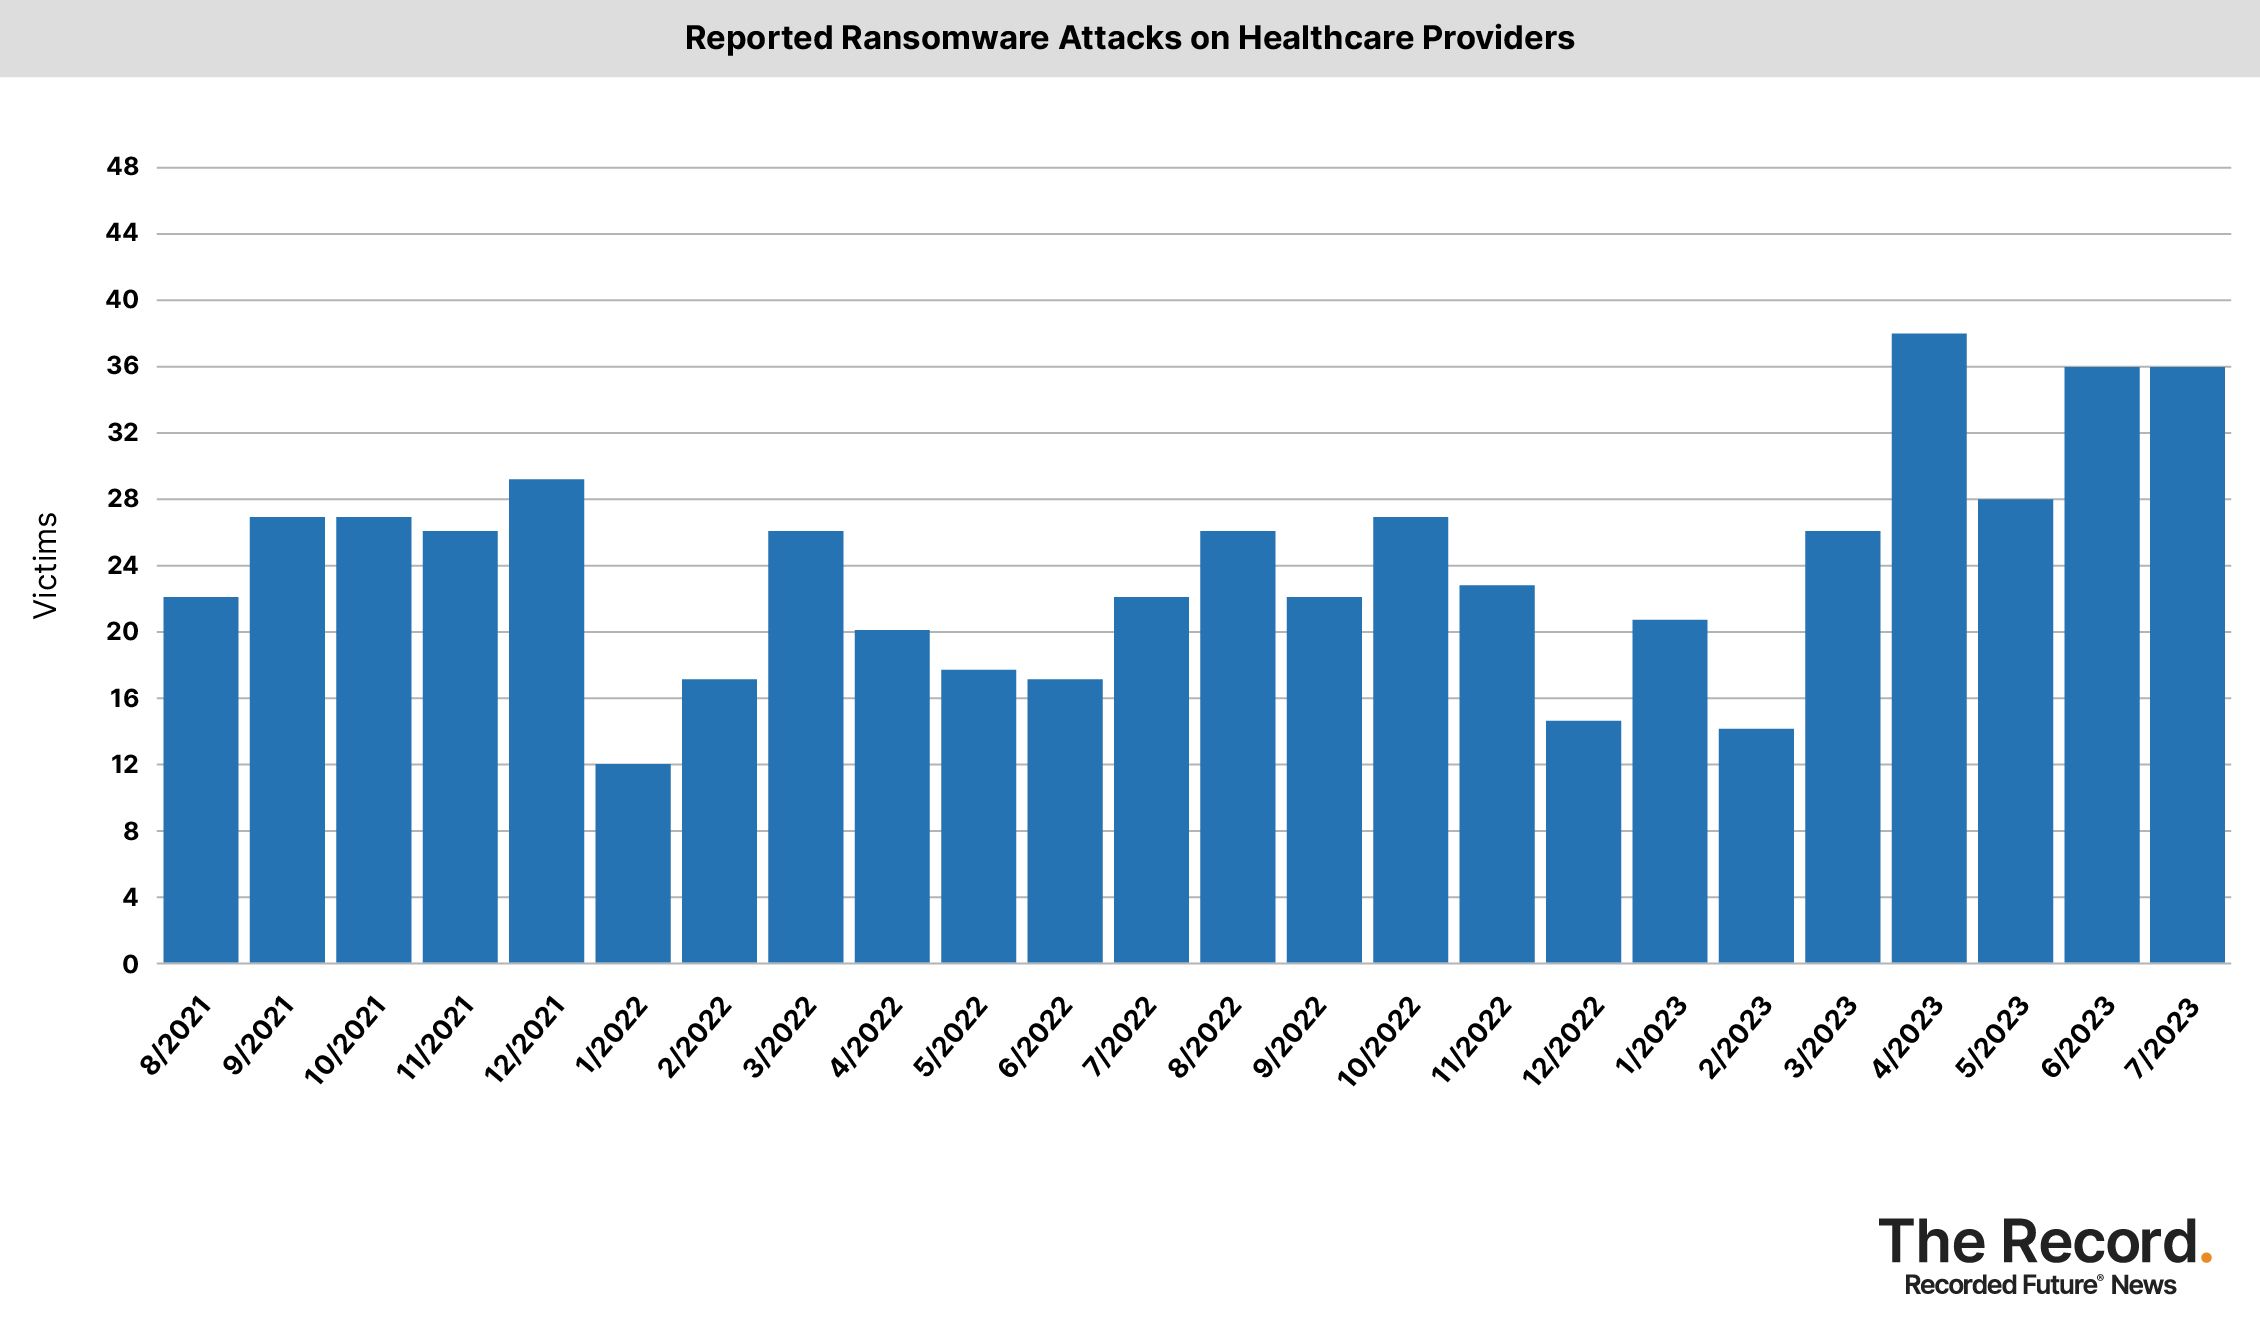 2023_0810 - Ransomware Tracker - Reported Ransomware Attacks on Healthcare Providers.jpg